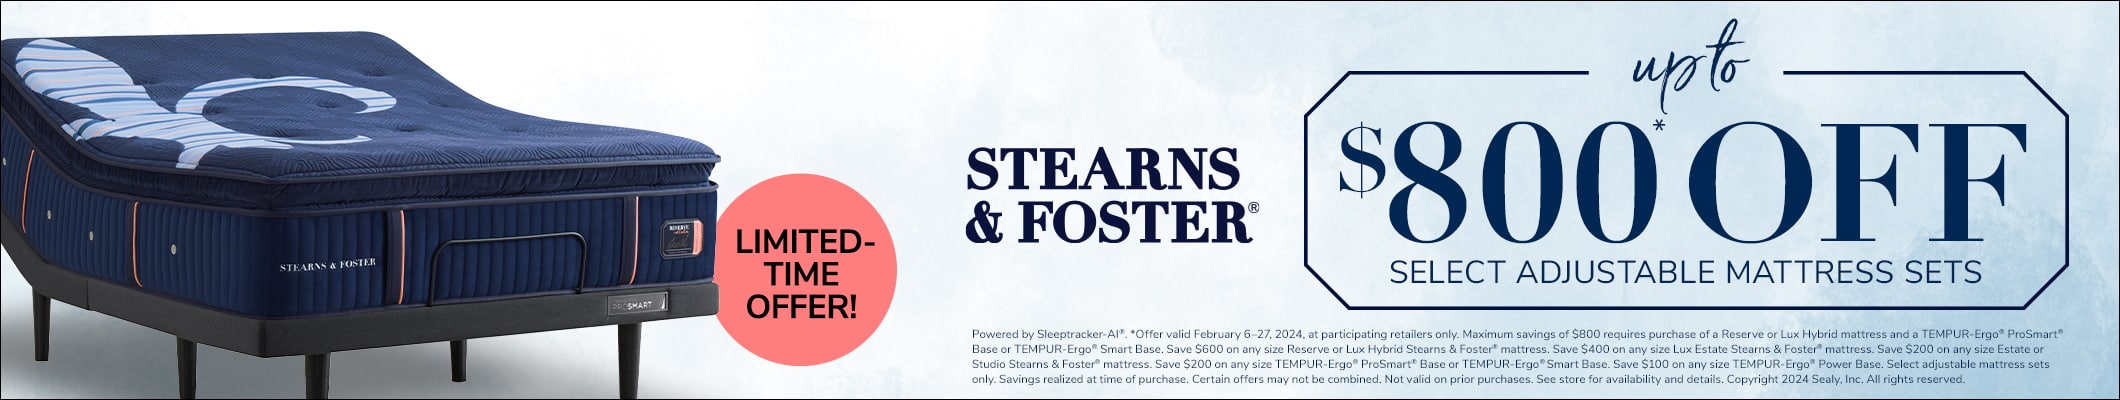 Stearns & Foster President's Day Sale